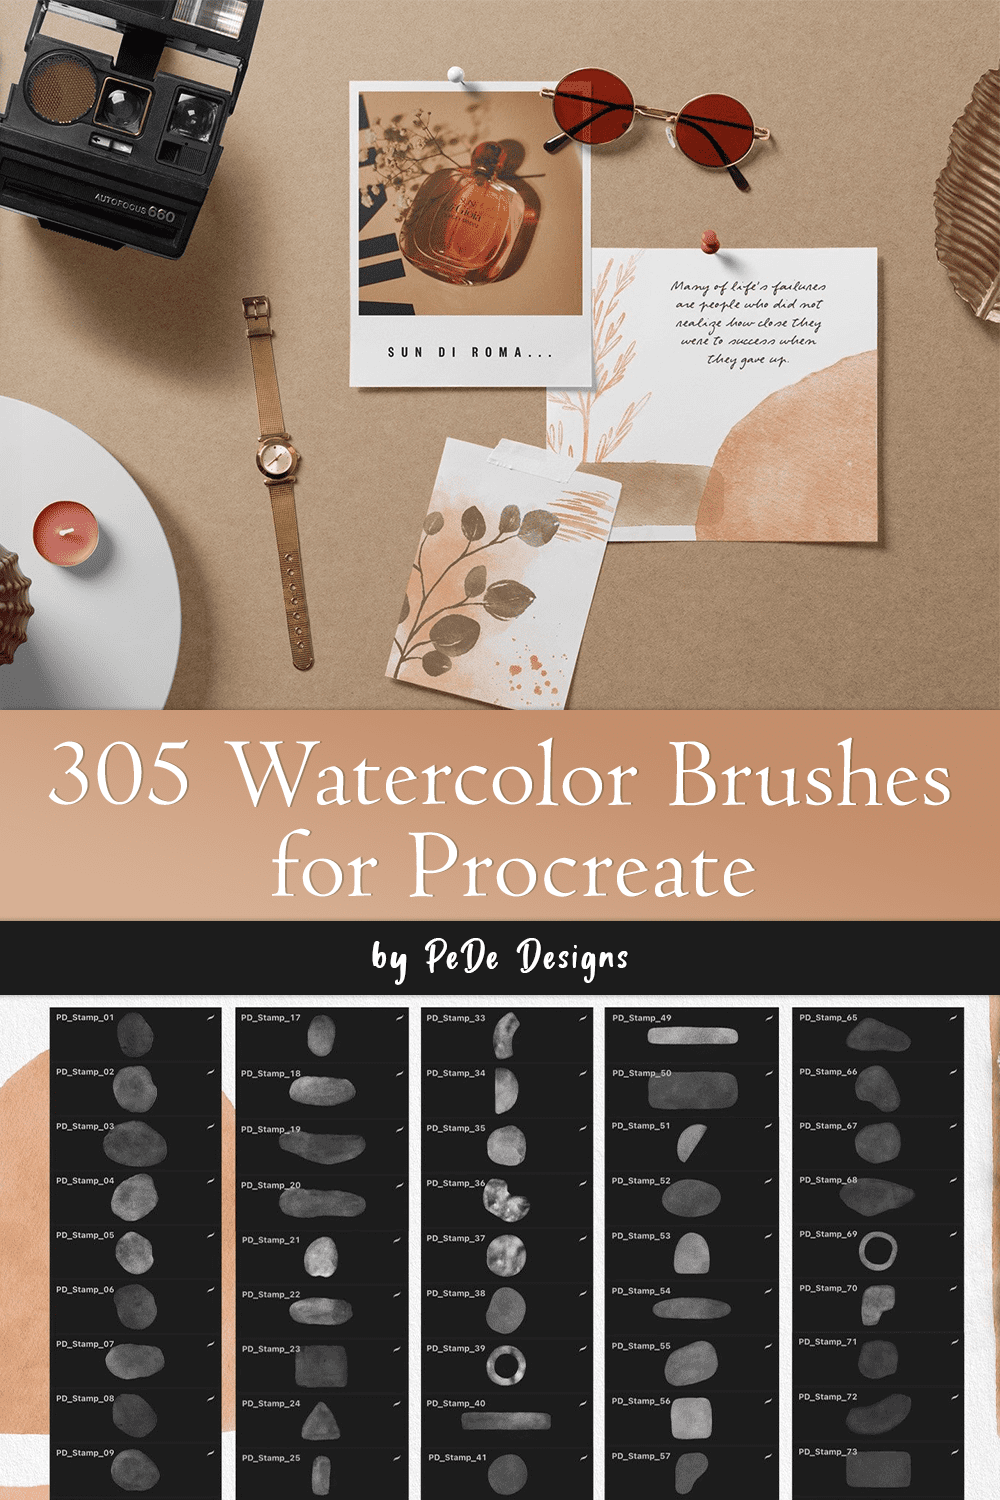 305 Watercolor Brushes For Procreate - Pinterest.